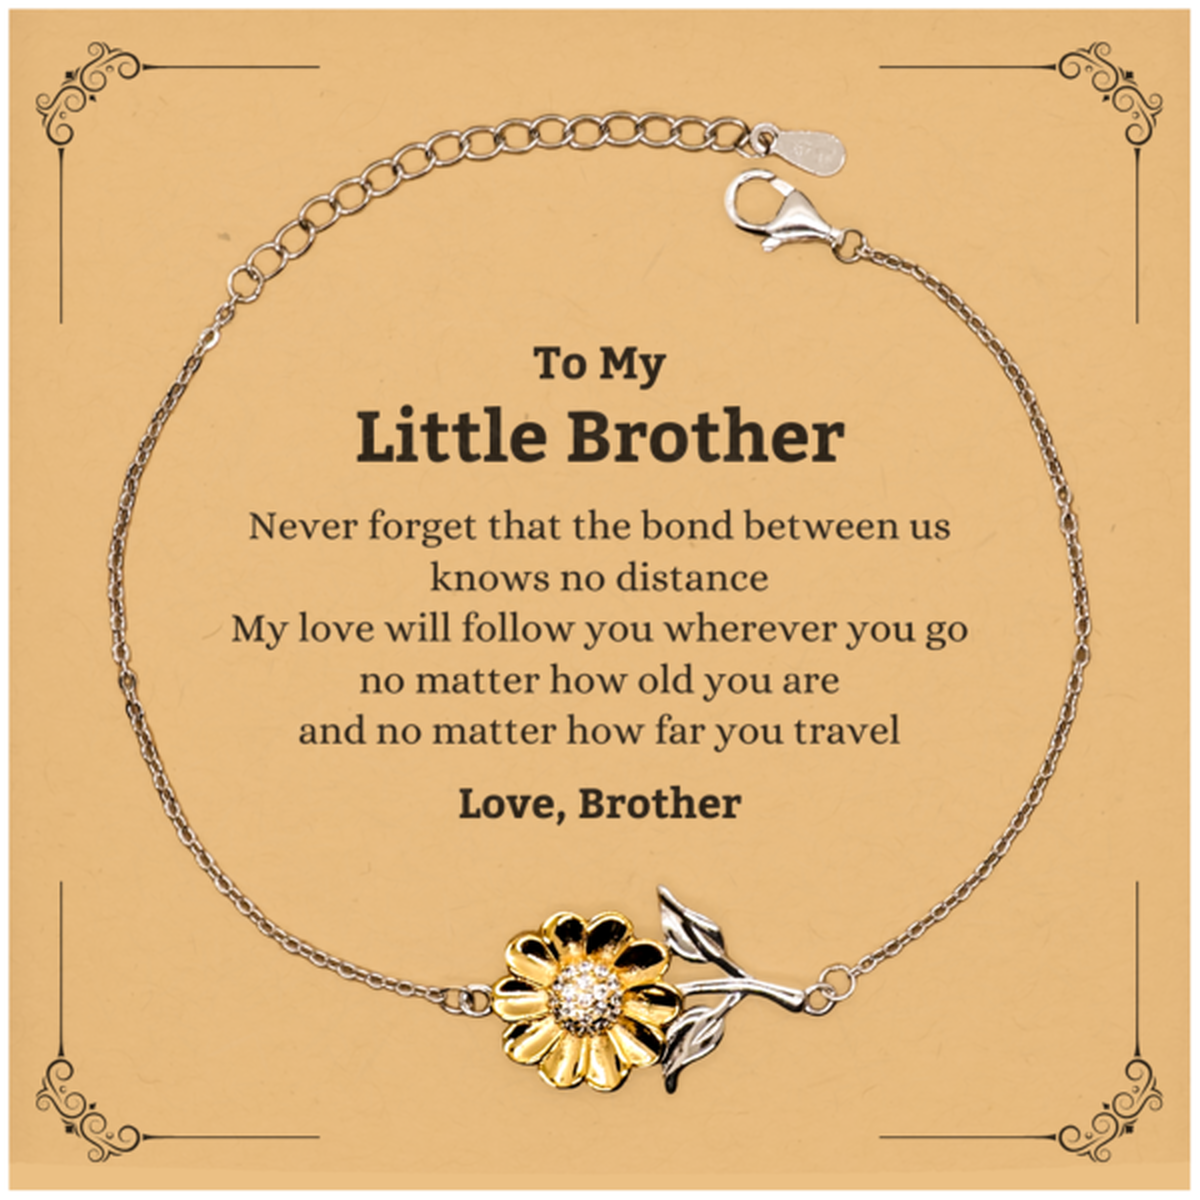 Little Brother Birthday Gifts from Brother, Adjustable Sunflower Bracelet for Little Brother Christmas Graduation Unique Gifts Little Brother Never forget that the bond between us knows no distance. Love, Brother